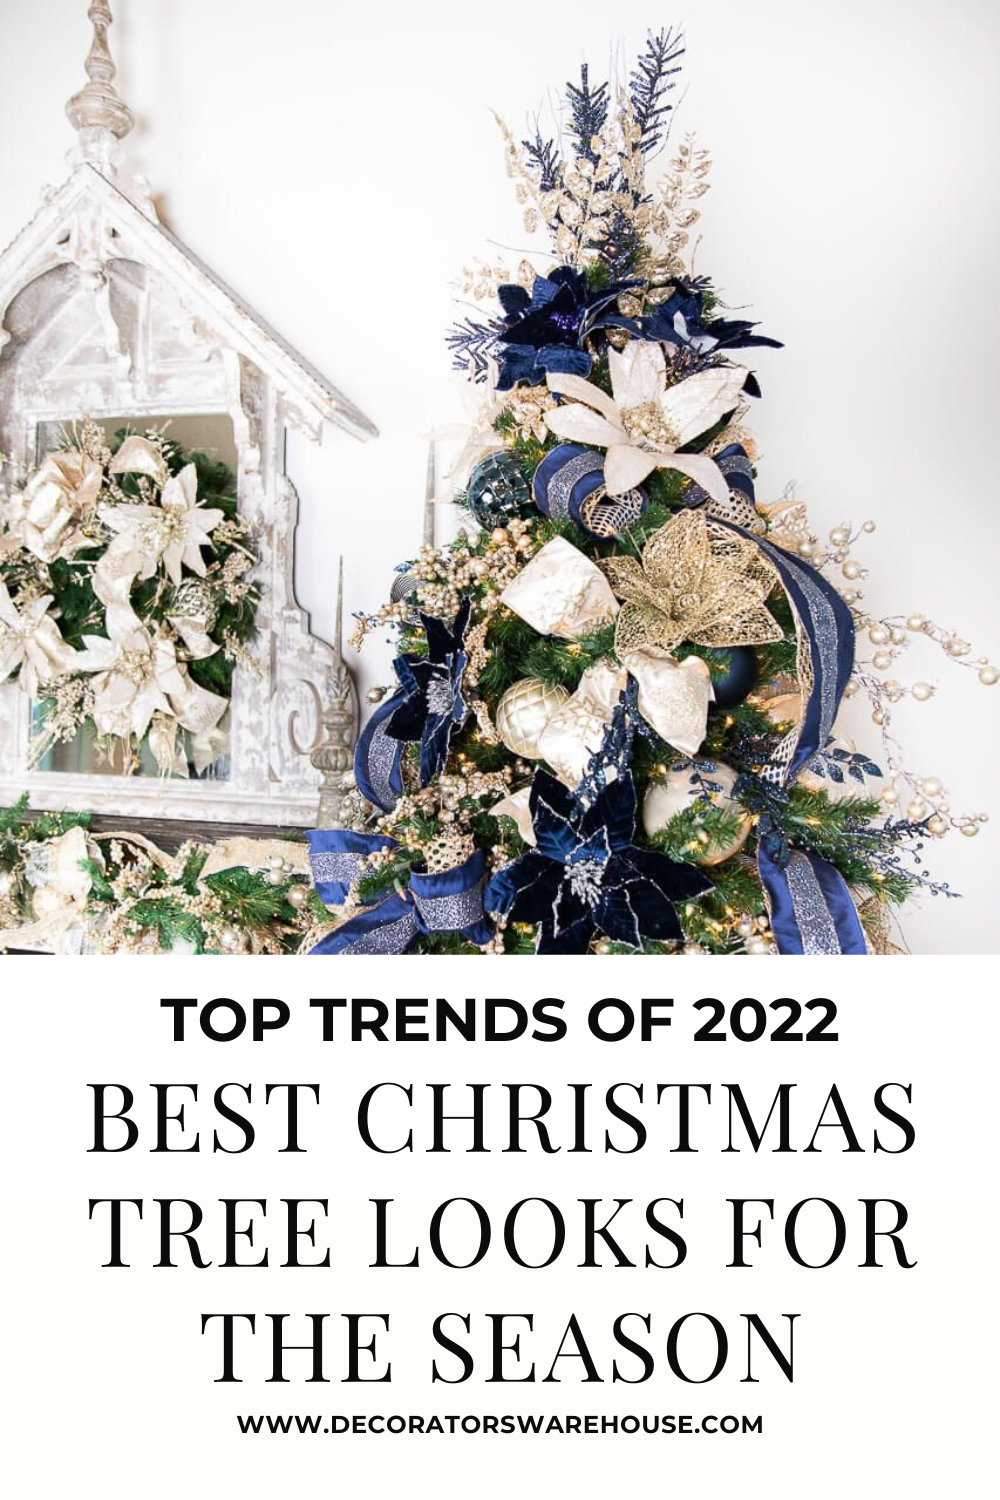 Christmas tree ideas and decor trends 2022